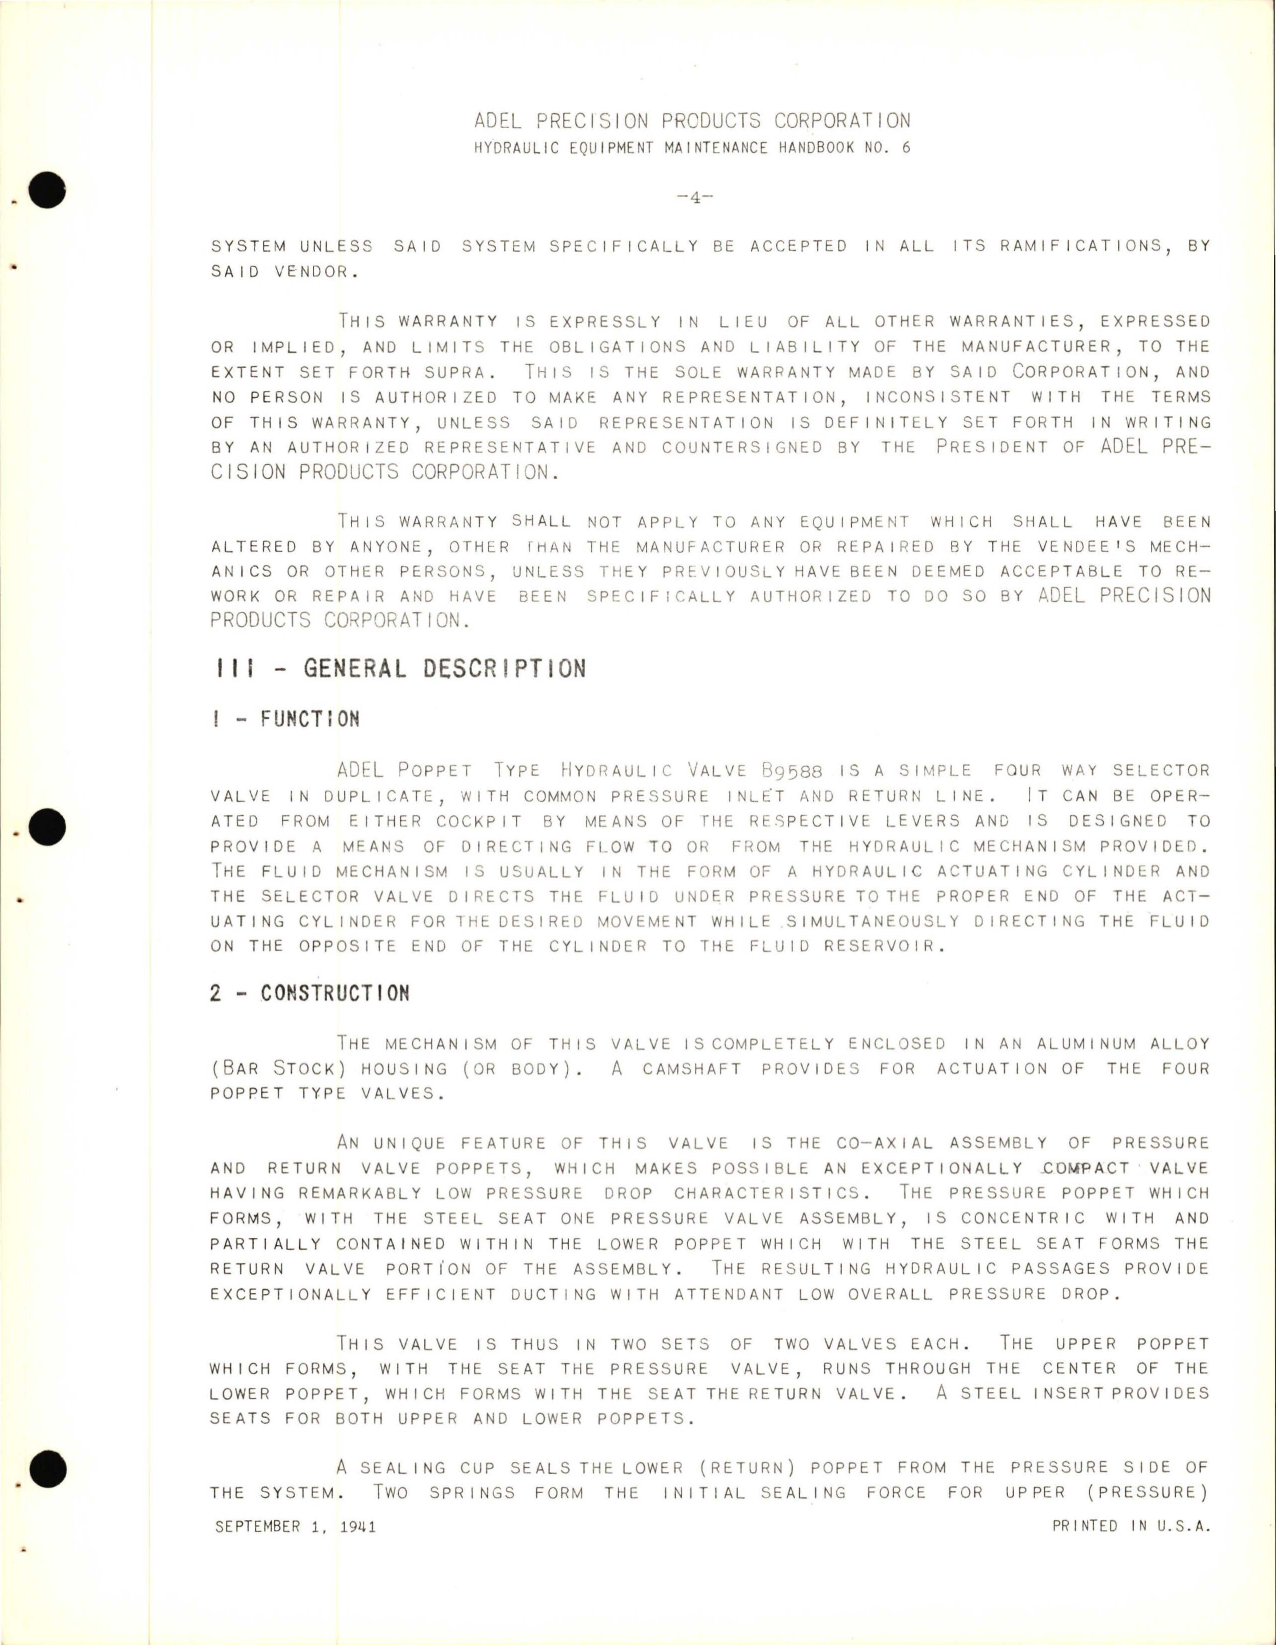 Sample page 9 from AirCorps Library document: Instructions with Parts Catalog for Steel Seat Selector Valve - B 9588 